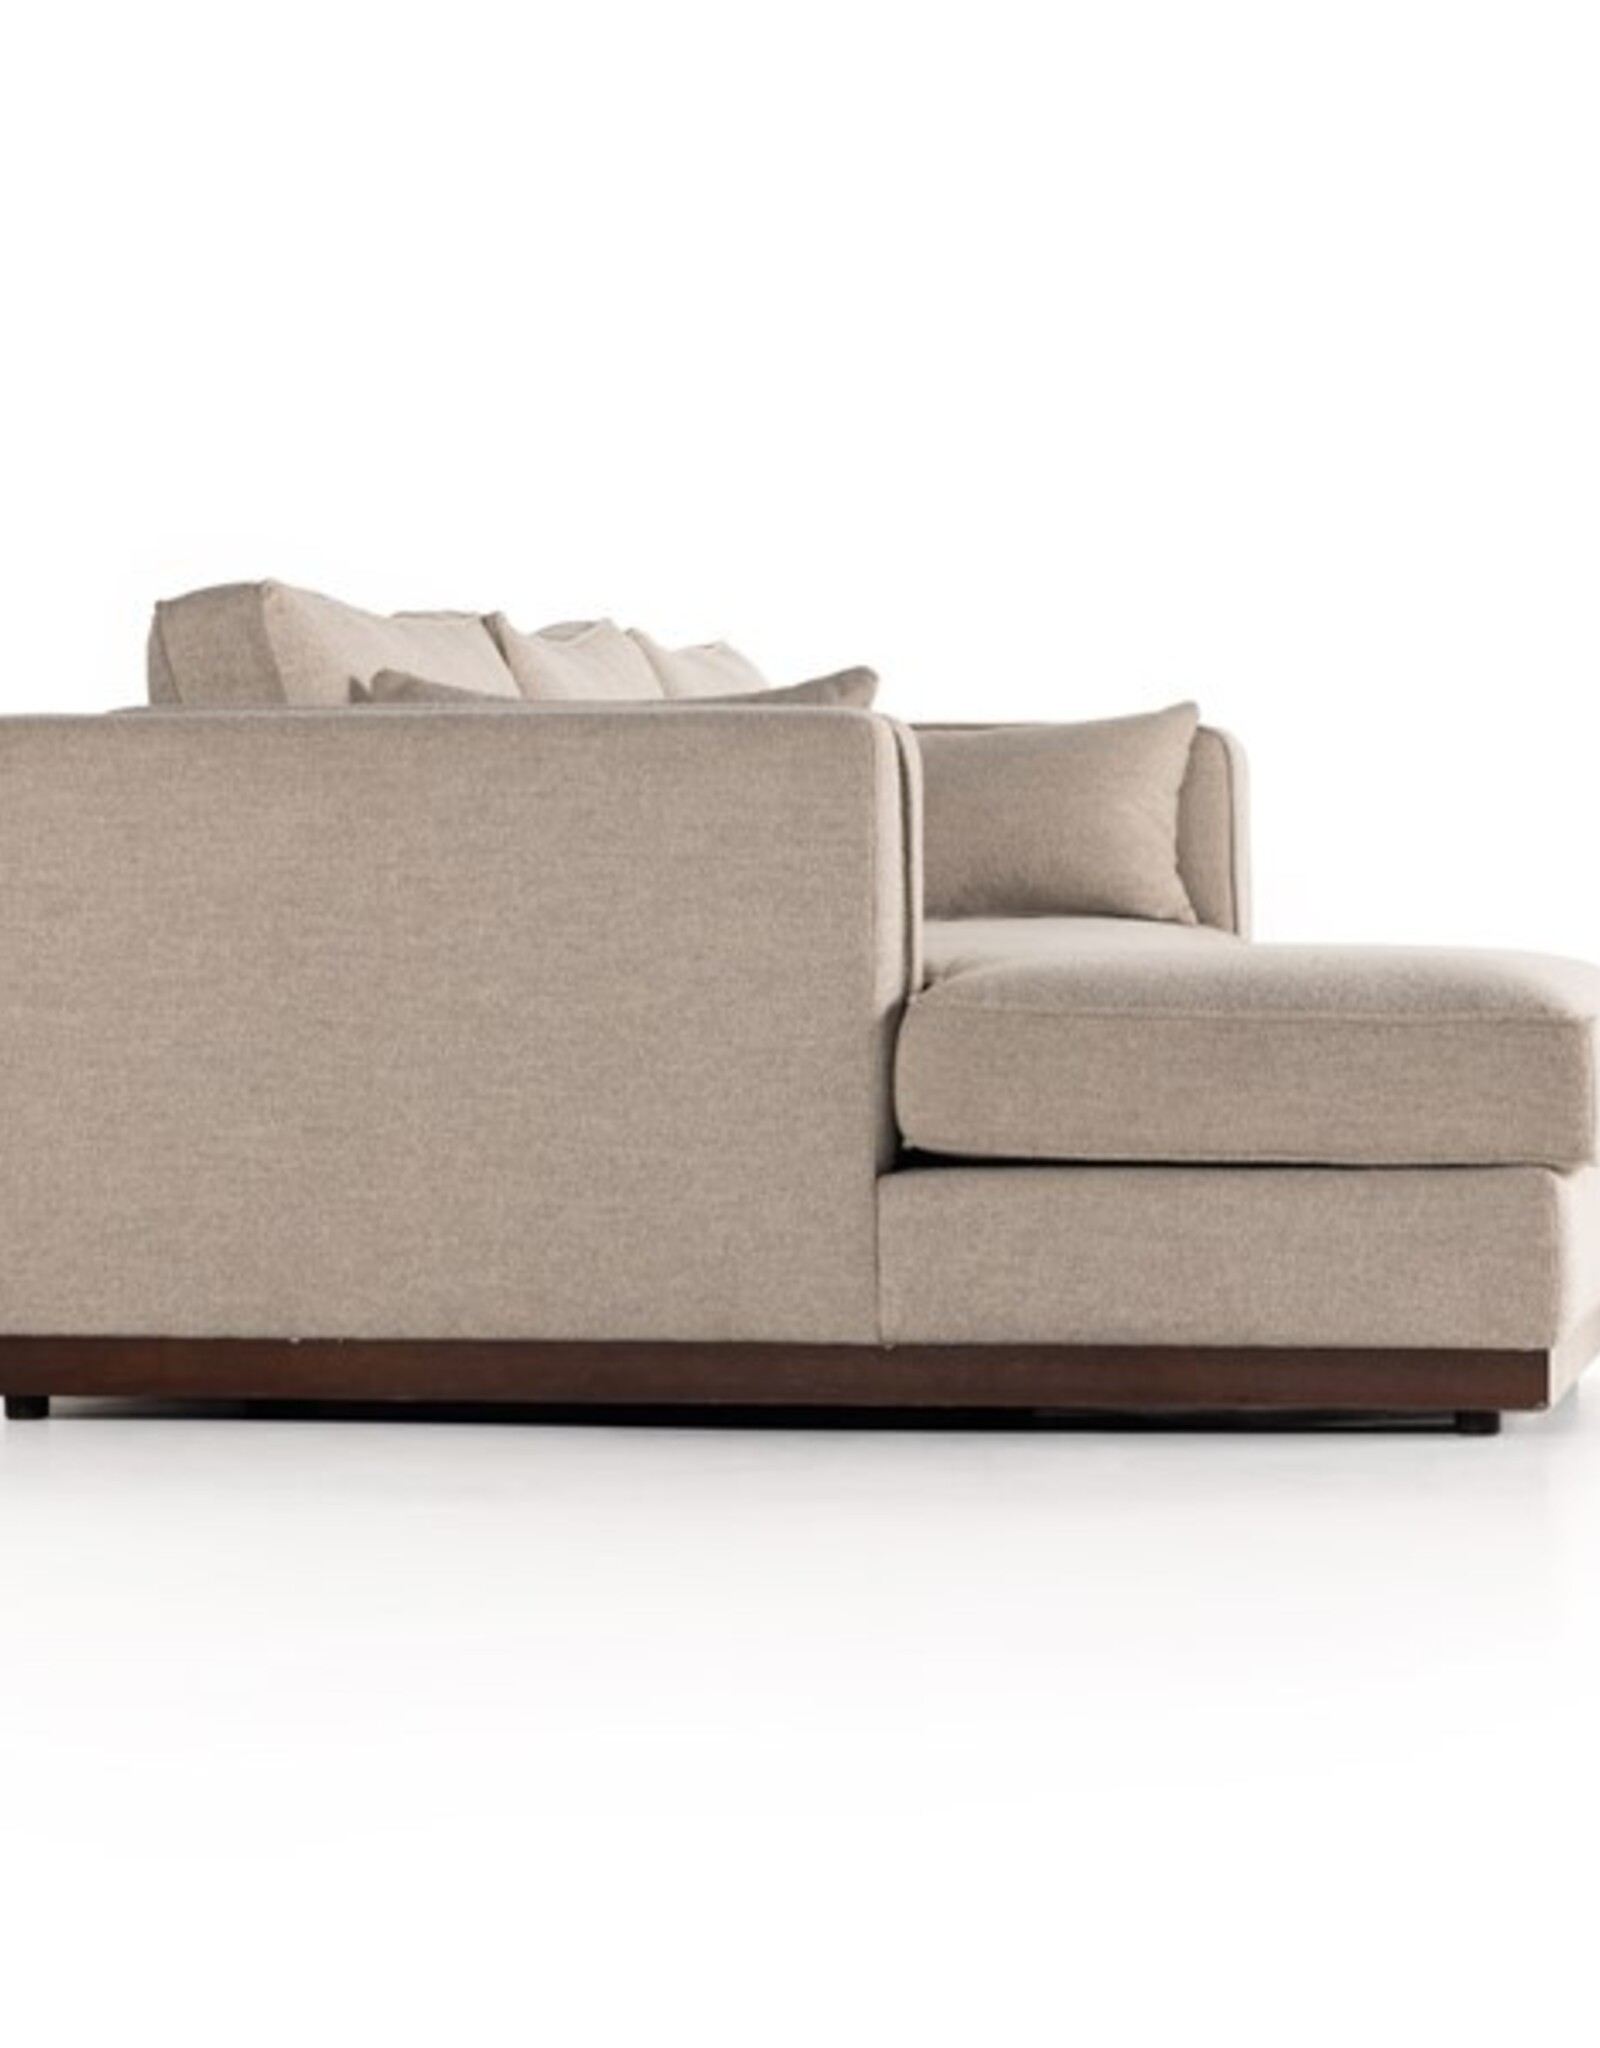 Lawrence 2pc Laf Sectional - 121"